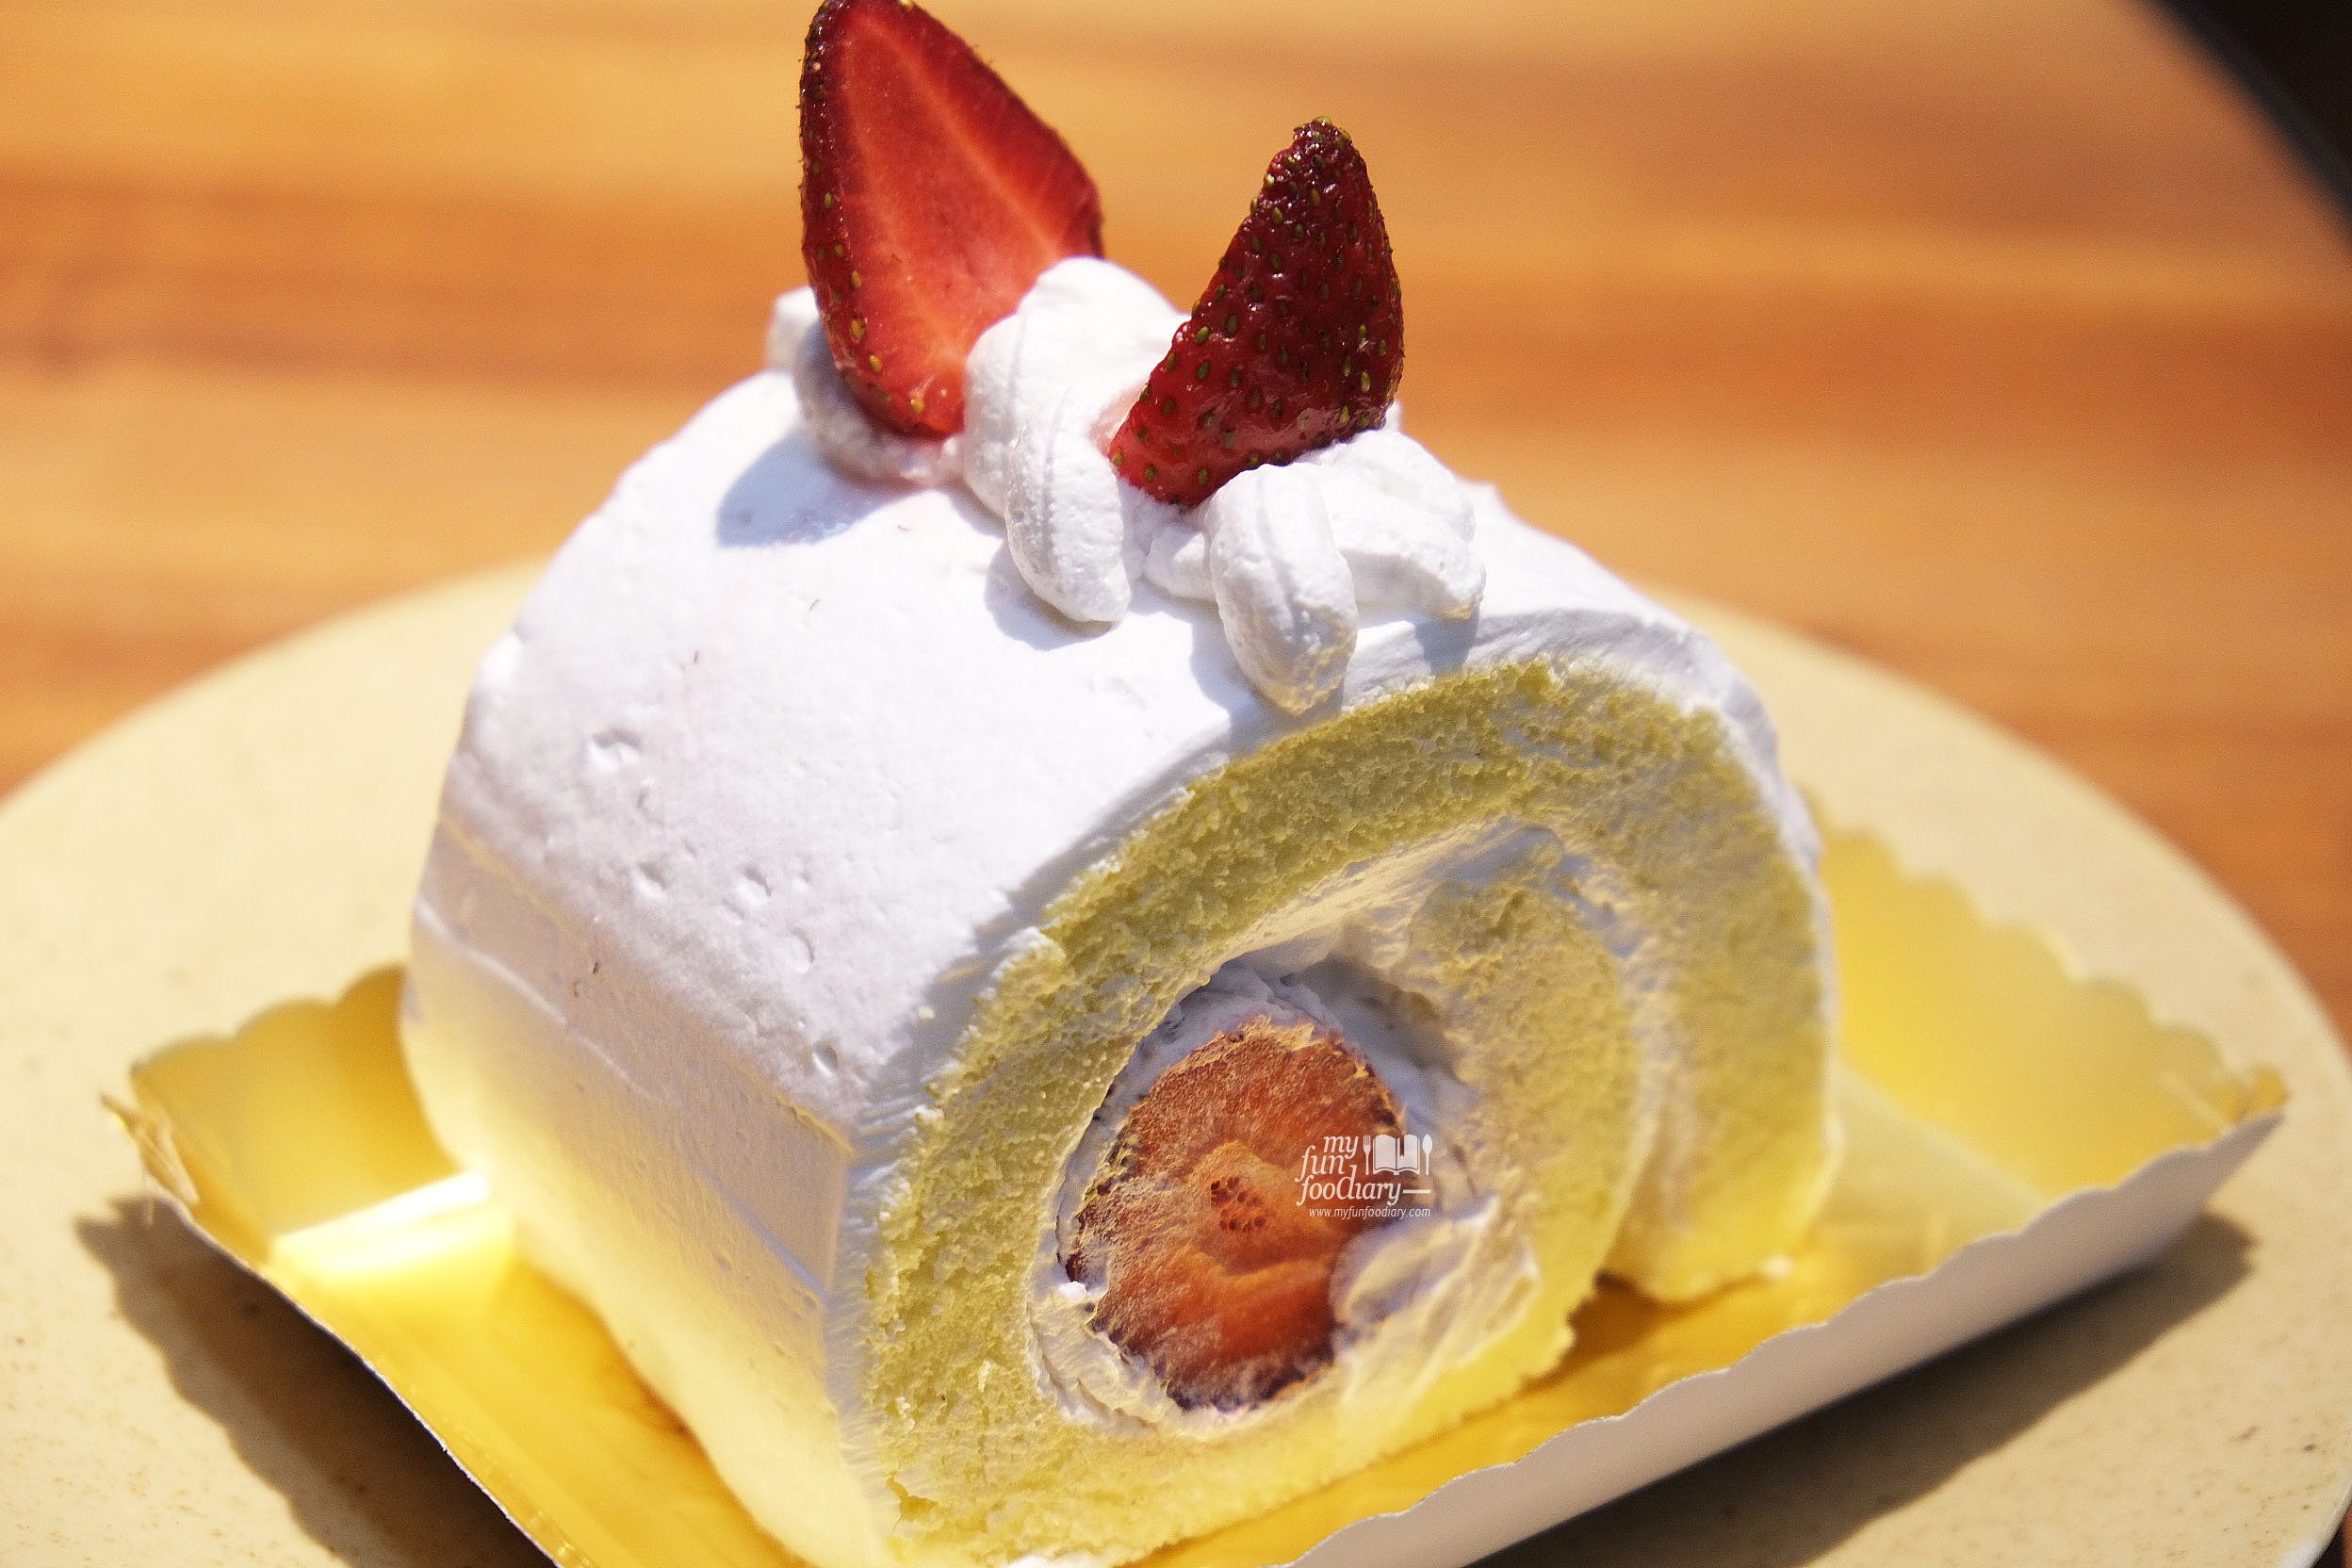 Strawberry Cream Swiss Roll at Dill Gourmet by Myfunfoodiary